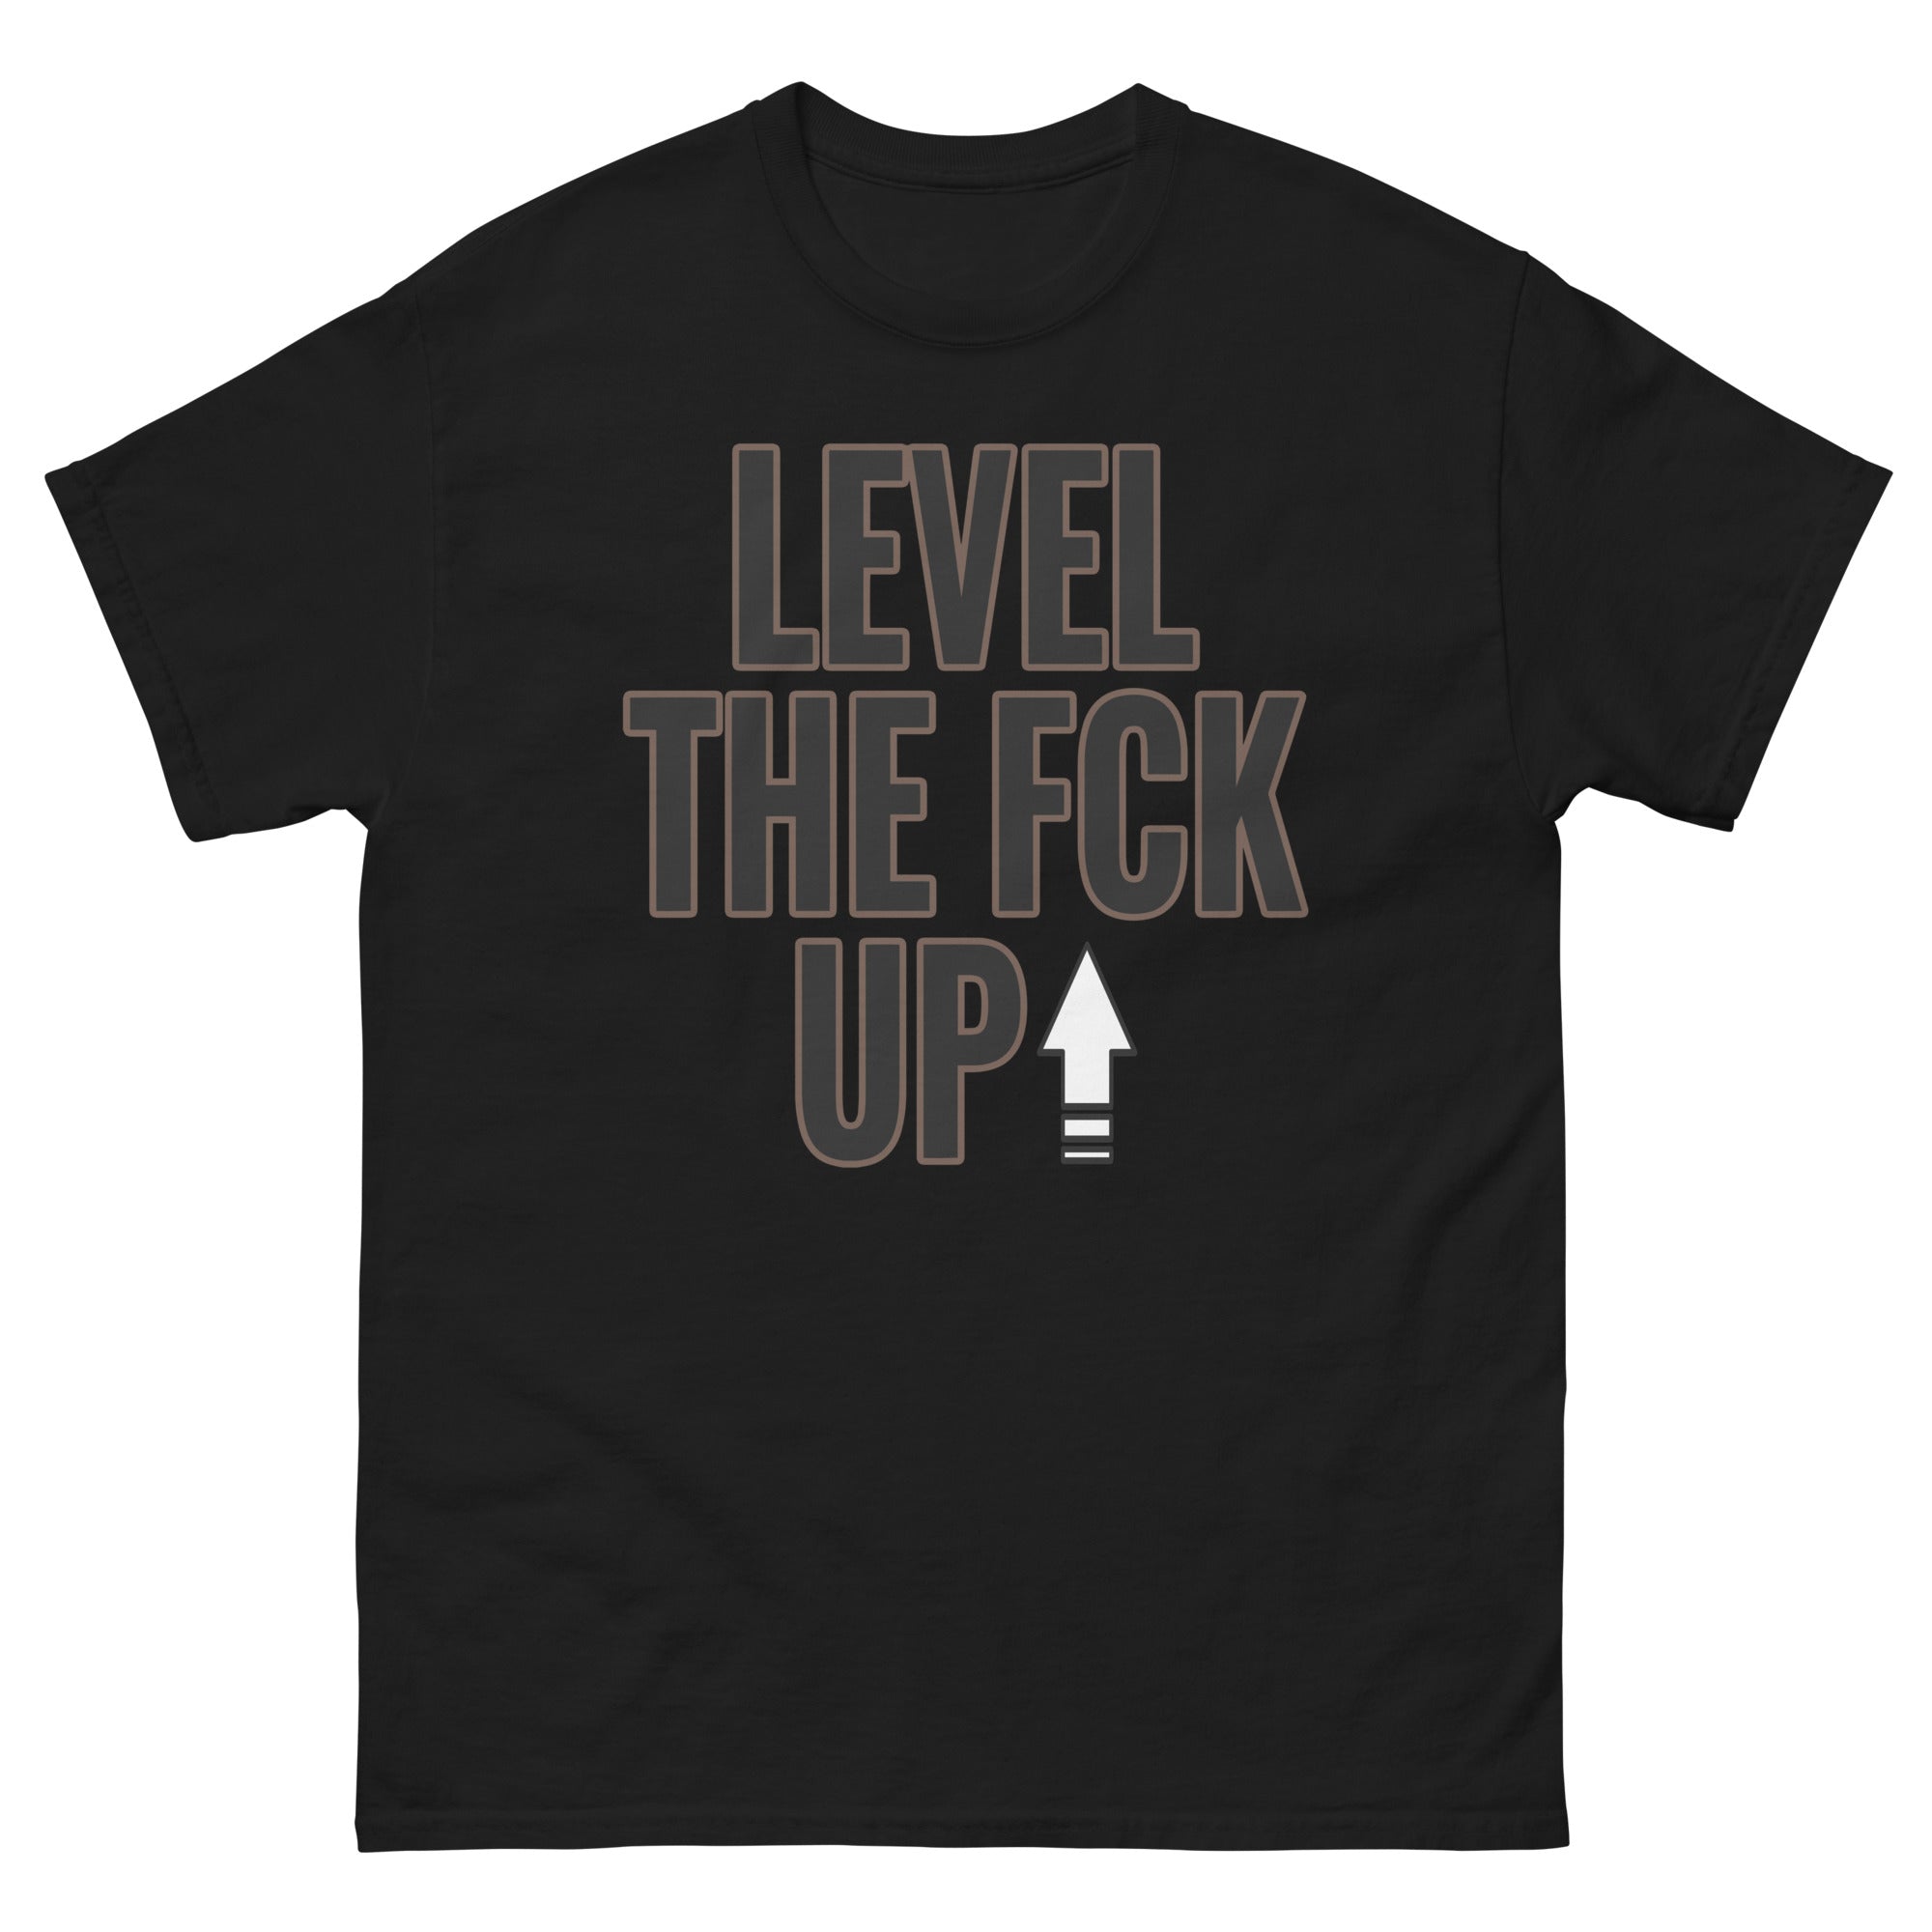 Cool Black graphic tee with “ Level The Fck Up ” design, that perfectly matches Palomino 1s sneakers 